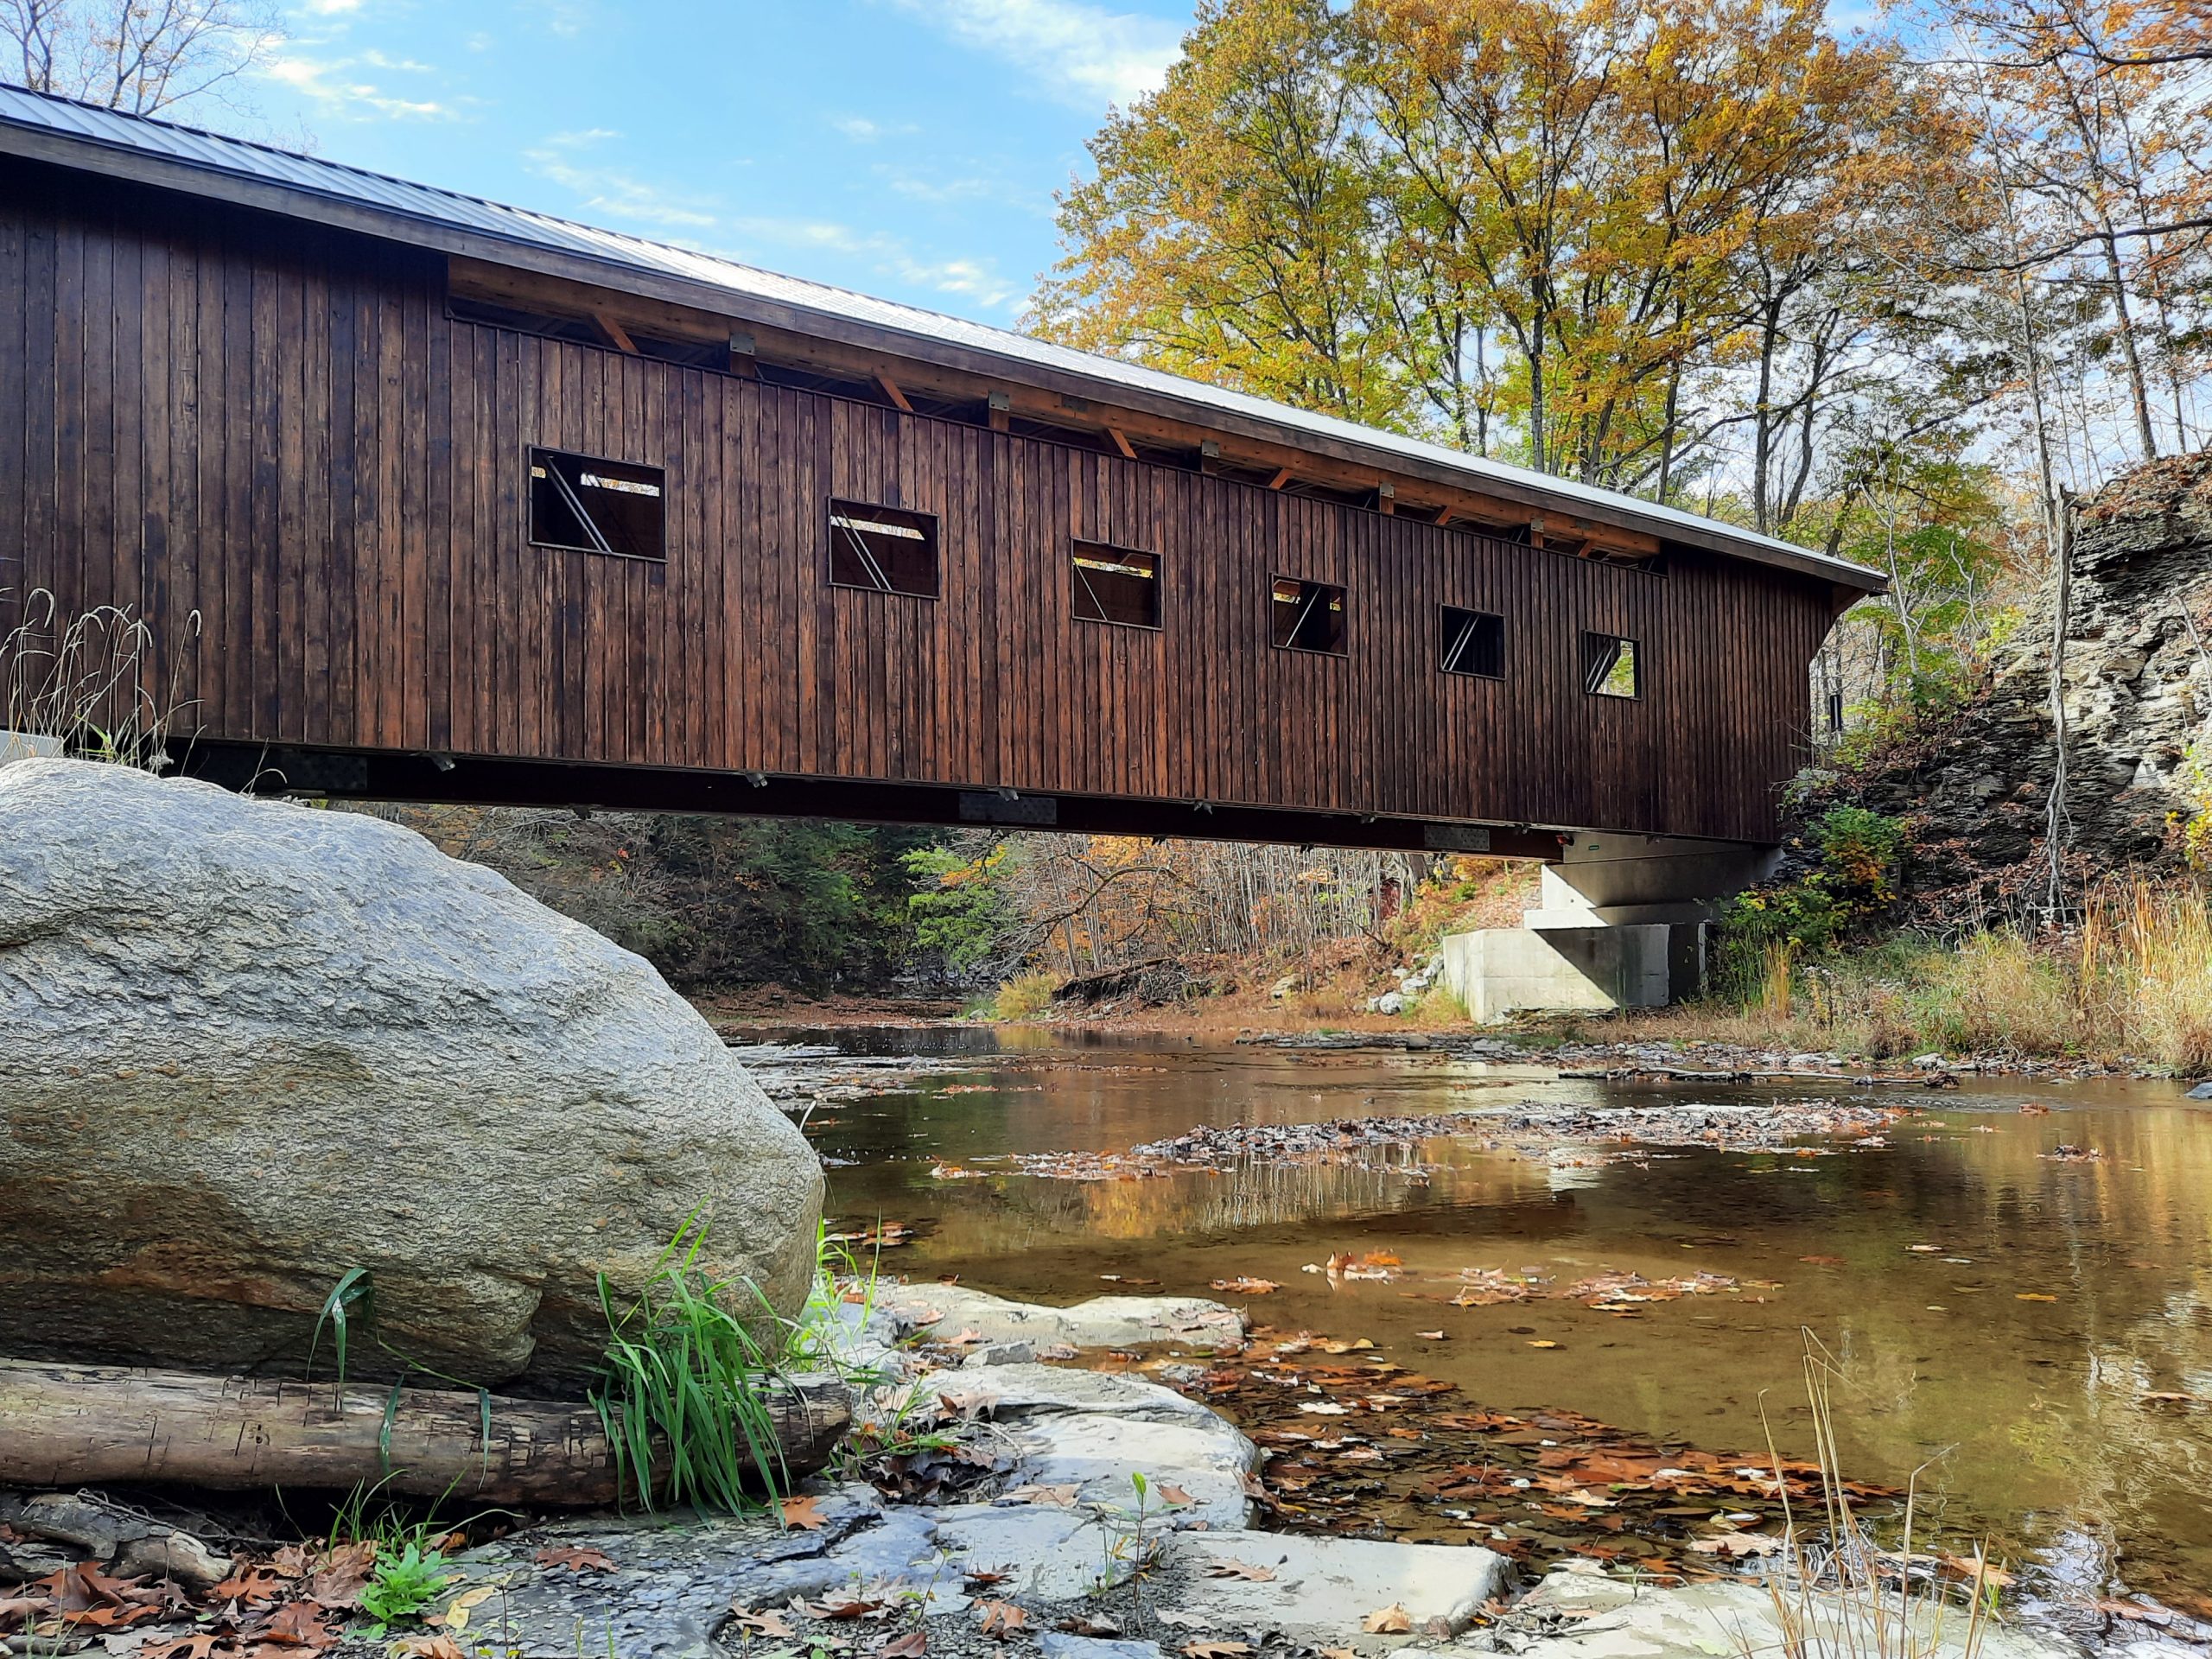 Second Place: Sherry Taber -- Covered Bridge (Mobile Device Camera)